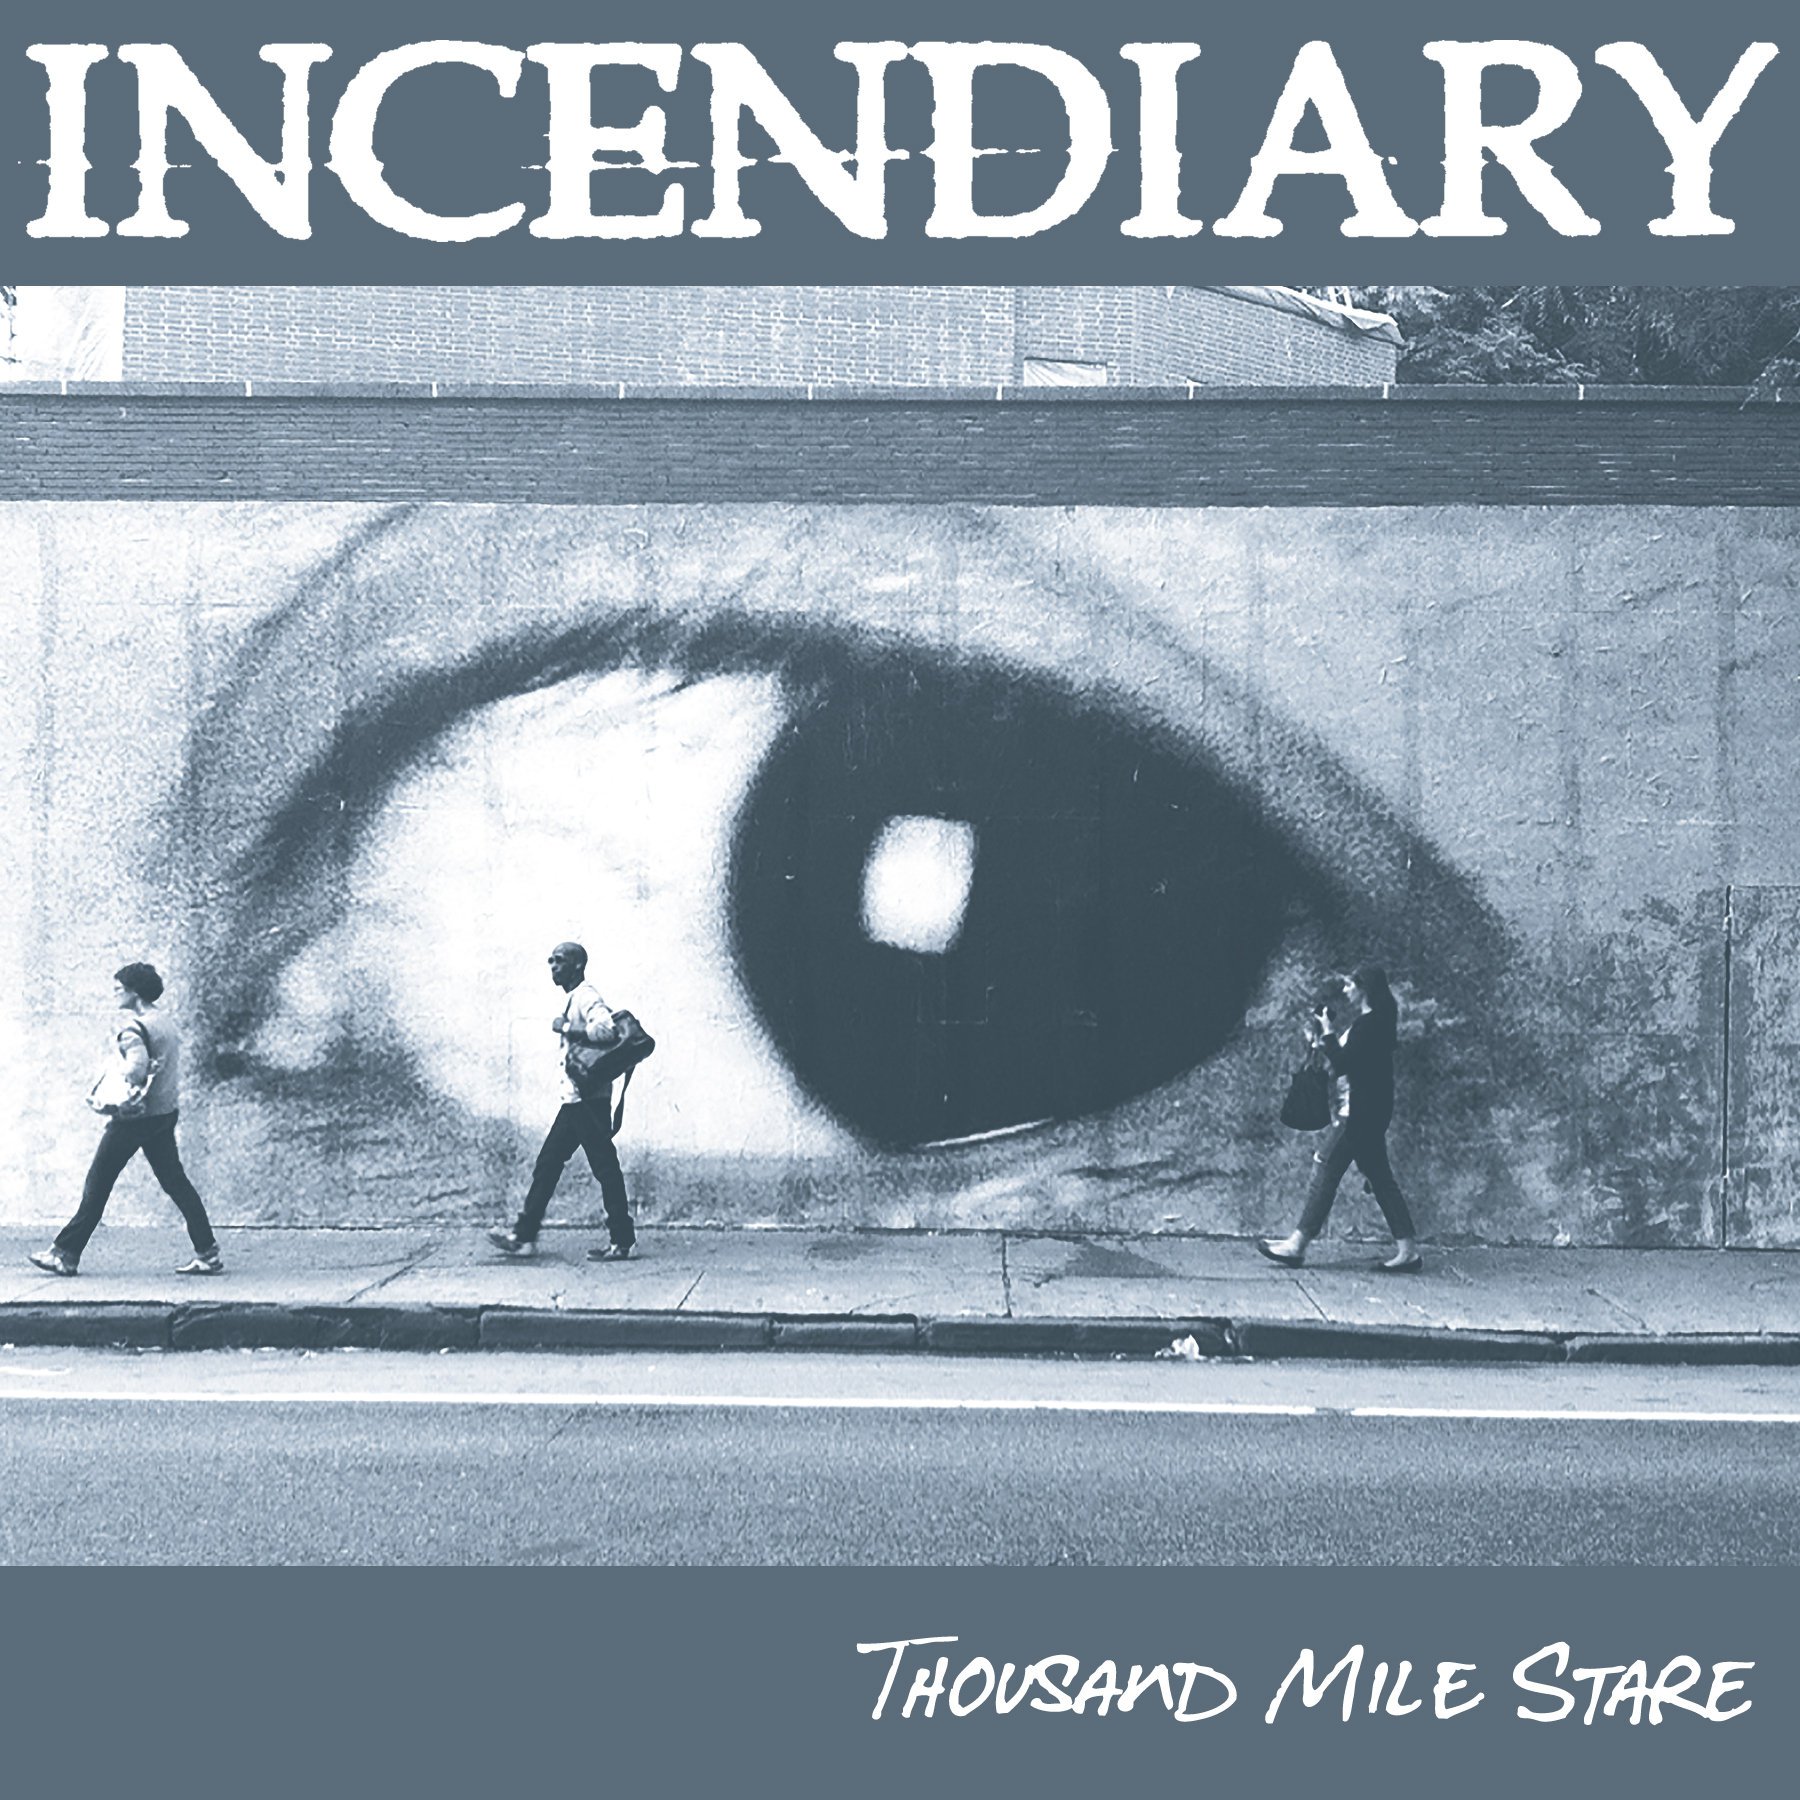 Incendiary “Thousand Mile Stare” LP | Looney Tunes